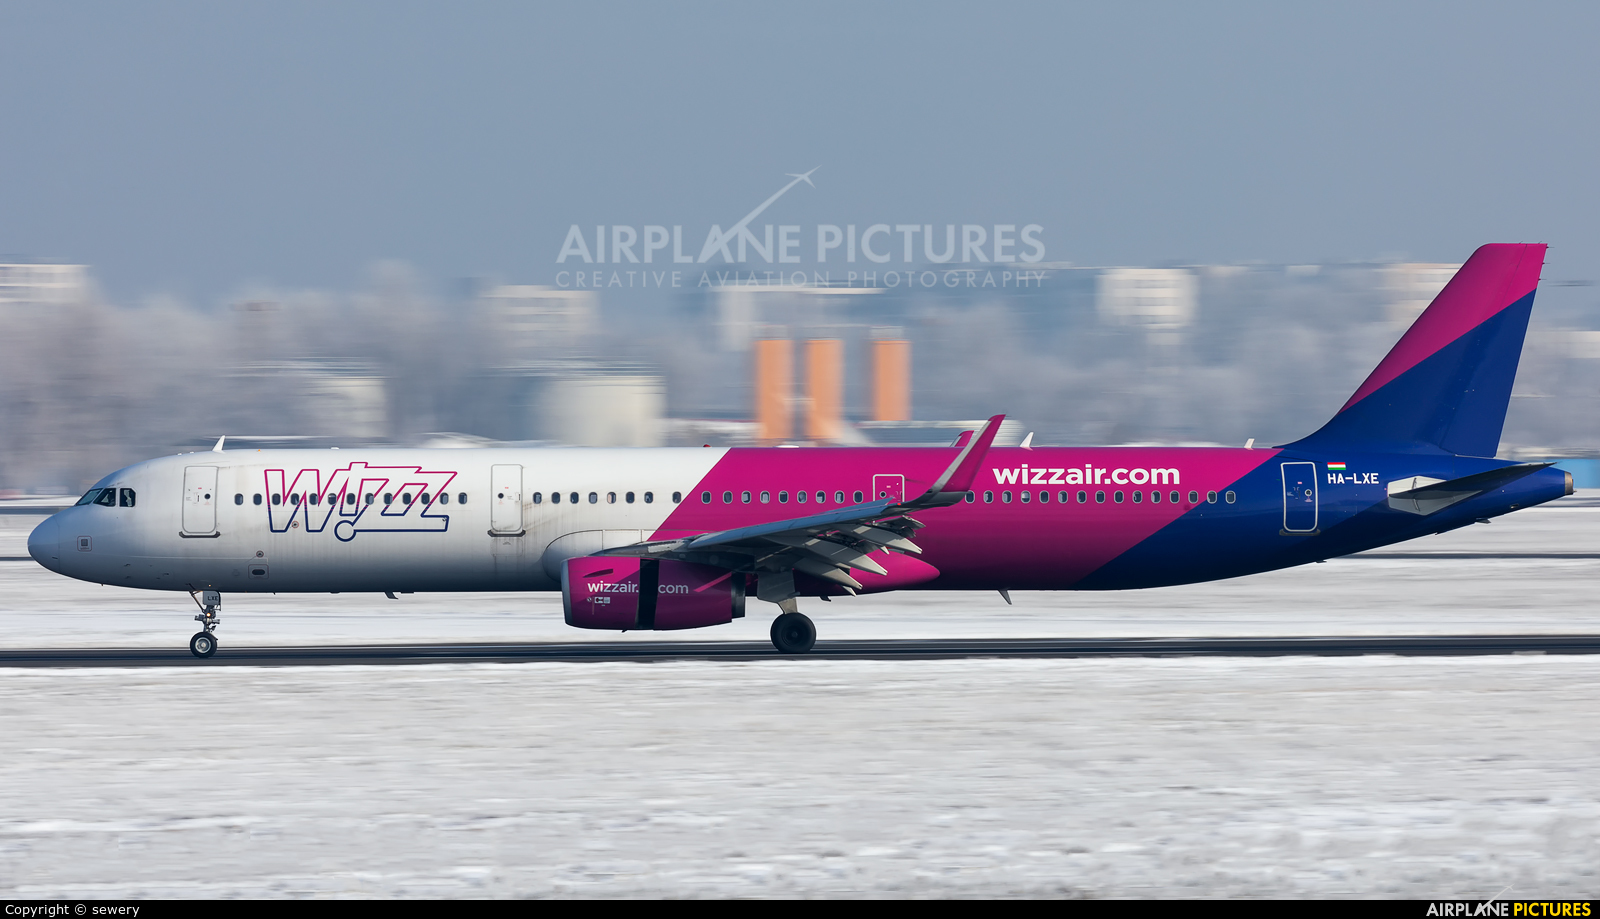 Wizz Air HA-LXE aircraft at Warsaw - Frederic Chopin